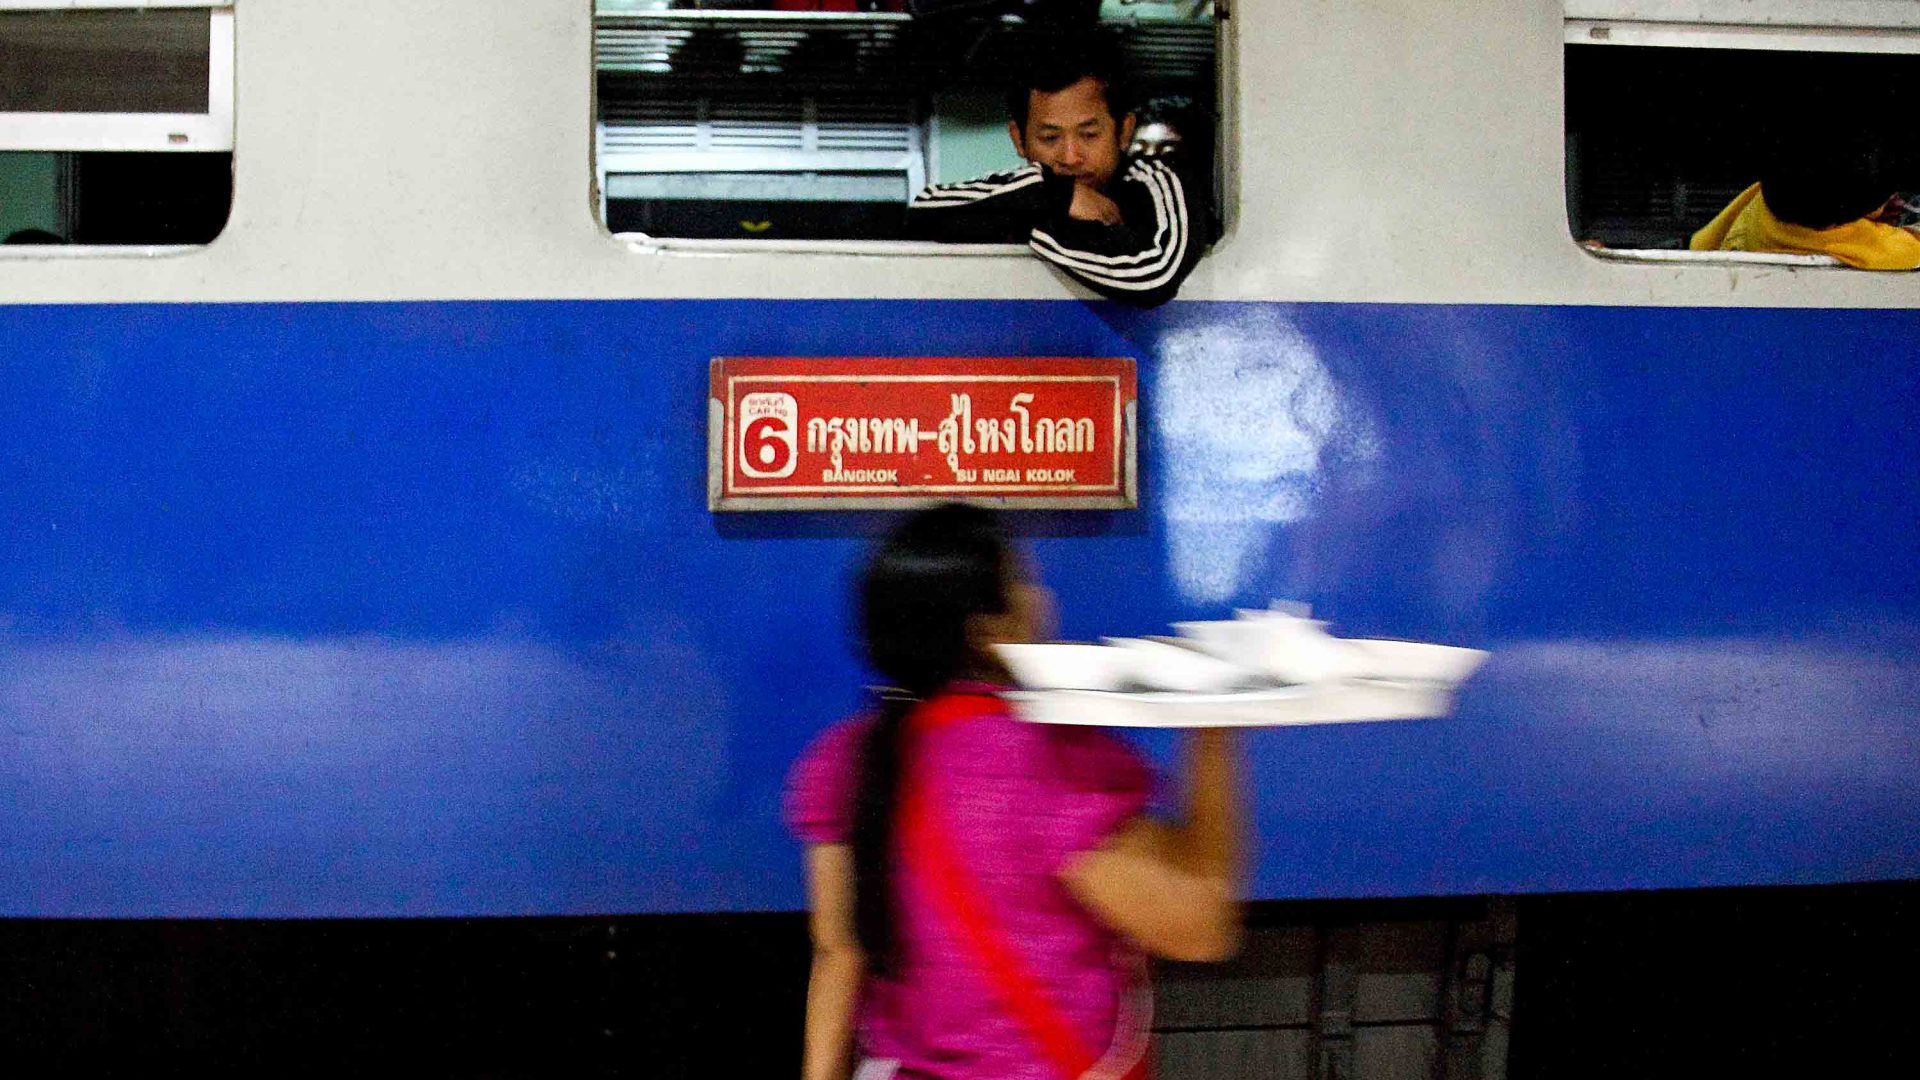 A woman selling snacks holds up a tray to a man seated in the window of a train.